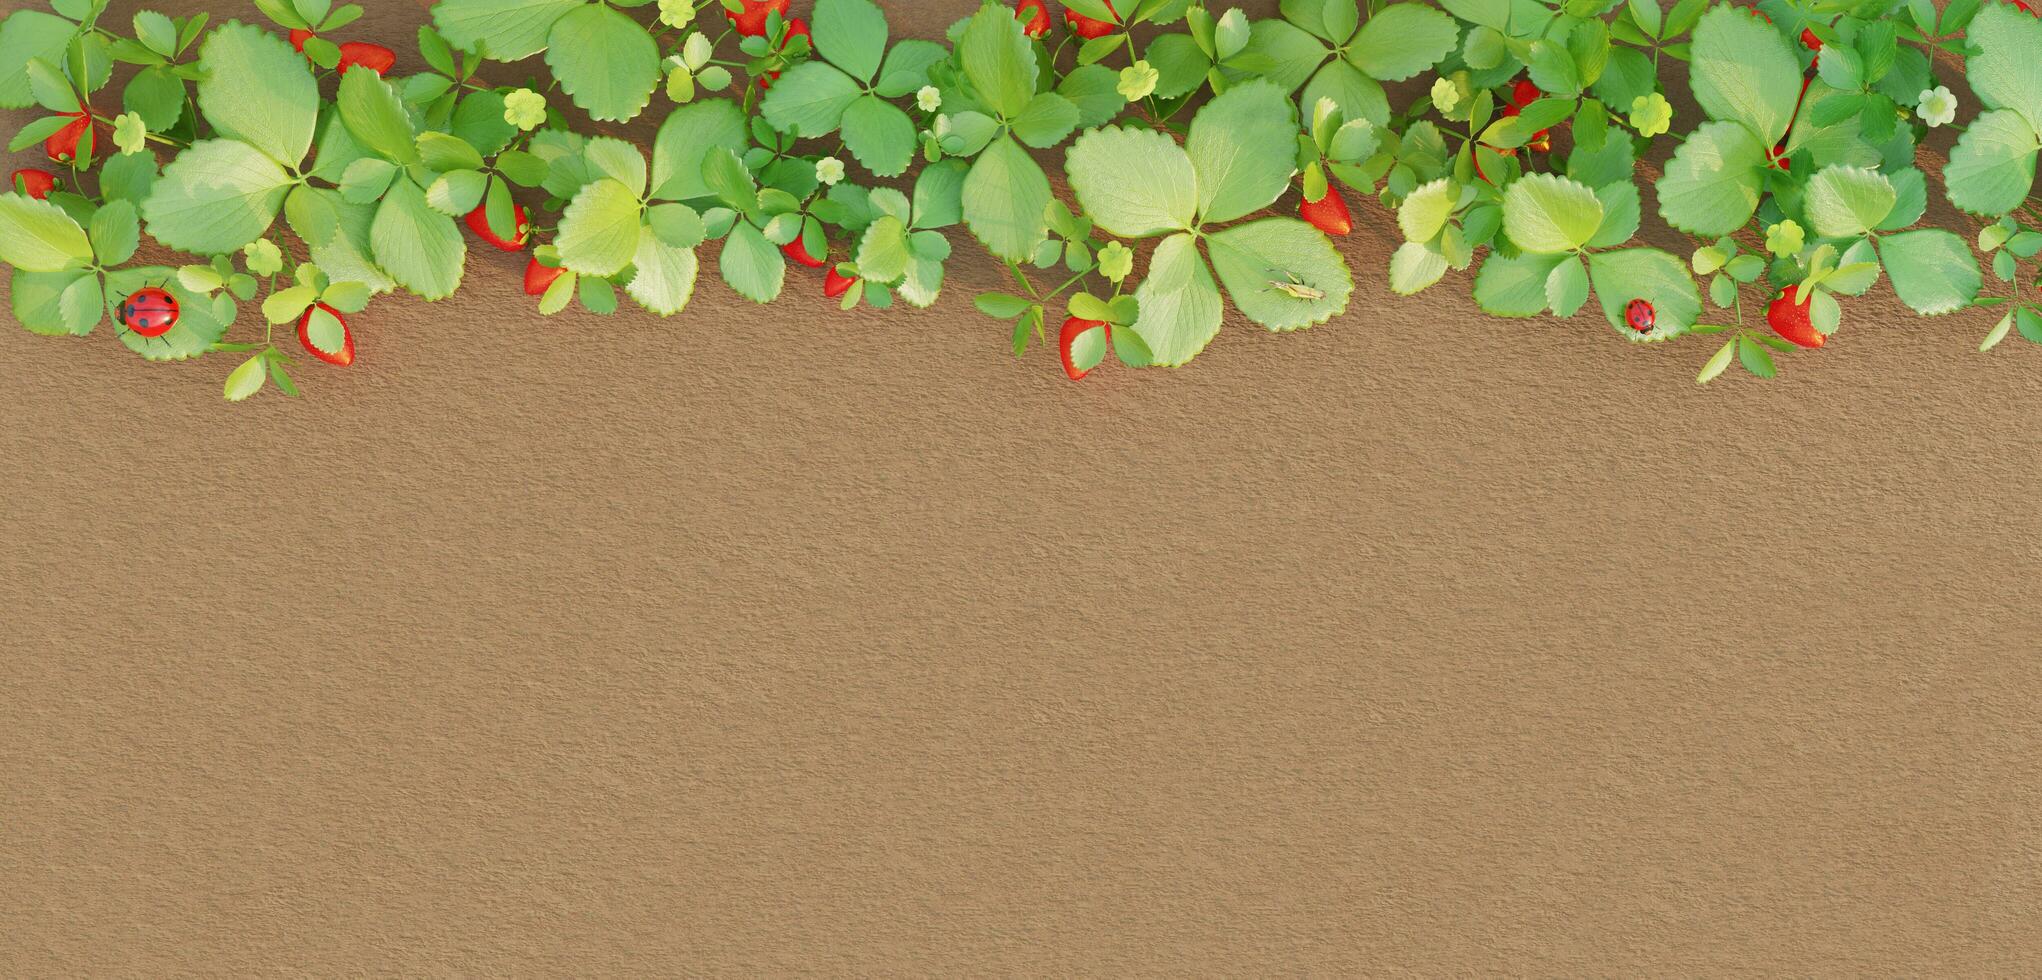 Free background Ground leaf frame vintage style paved with green leaves Ground with fresh branches Leaf border 3D illustration Strawberry tree photo